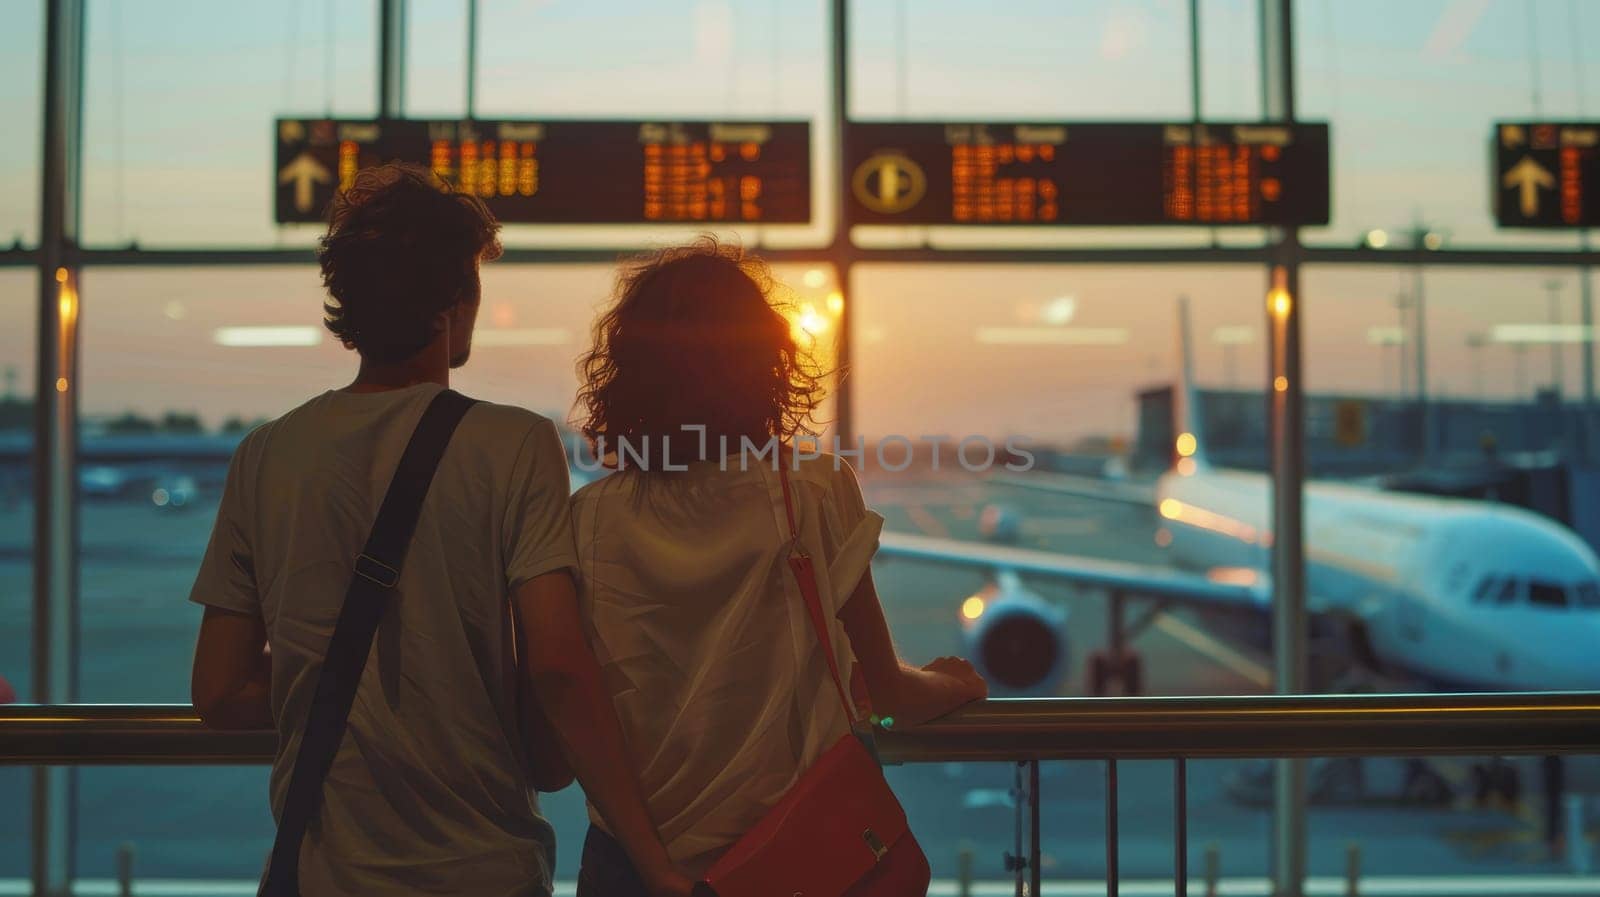 Couple traveling and looking at the flight schedule at the airport, Attractive couple in an airport.